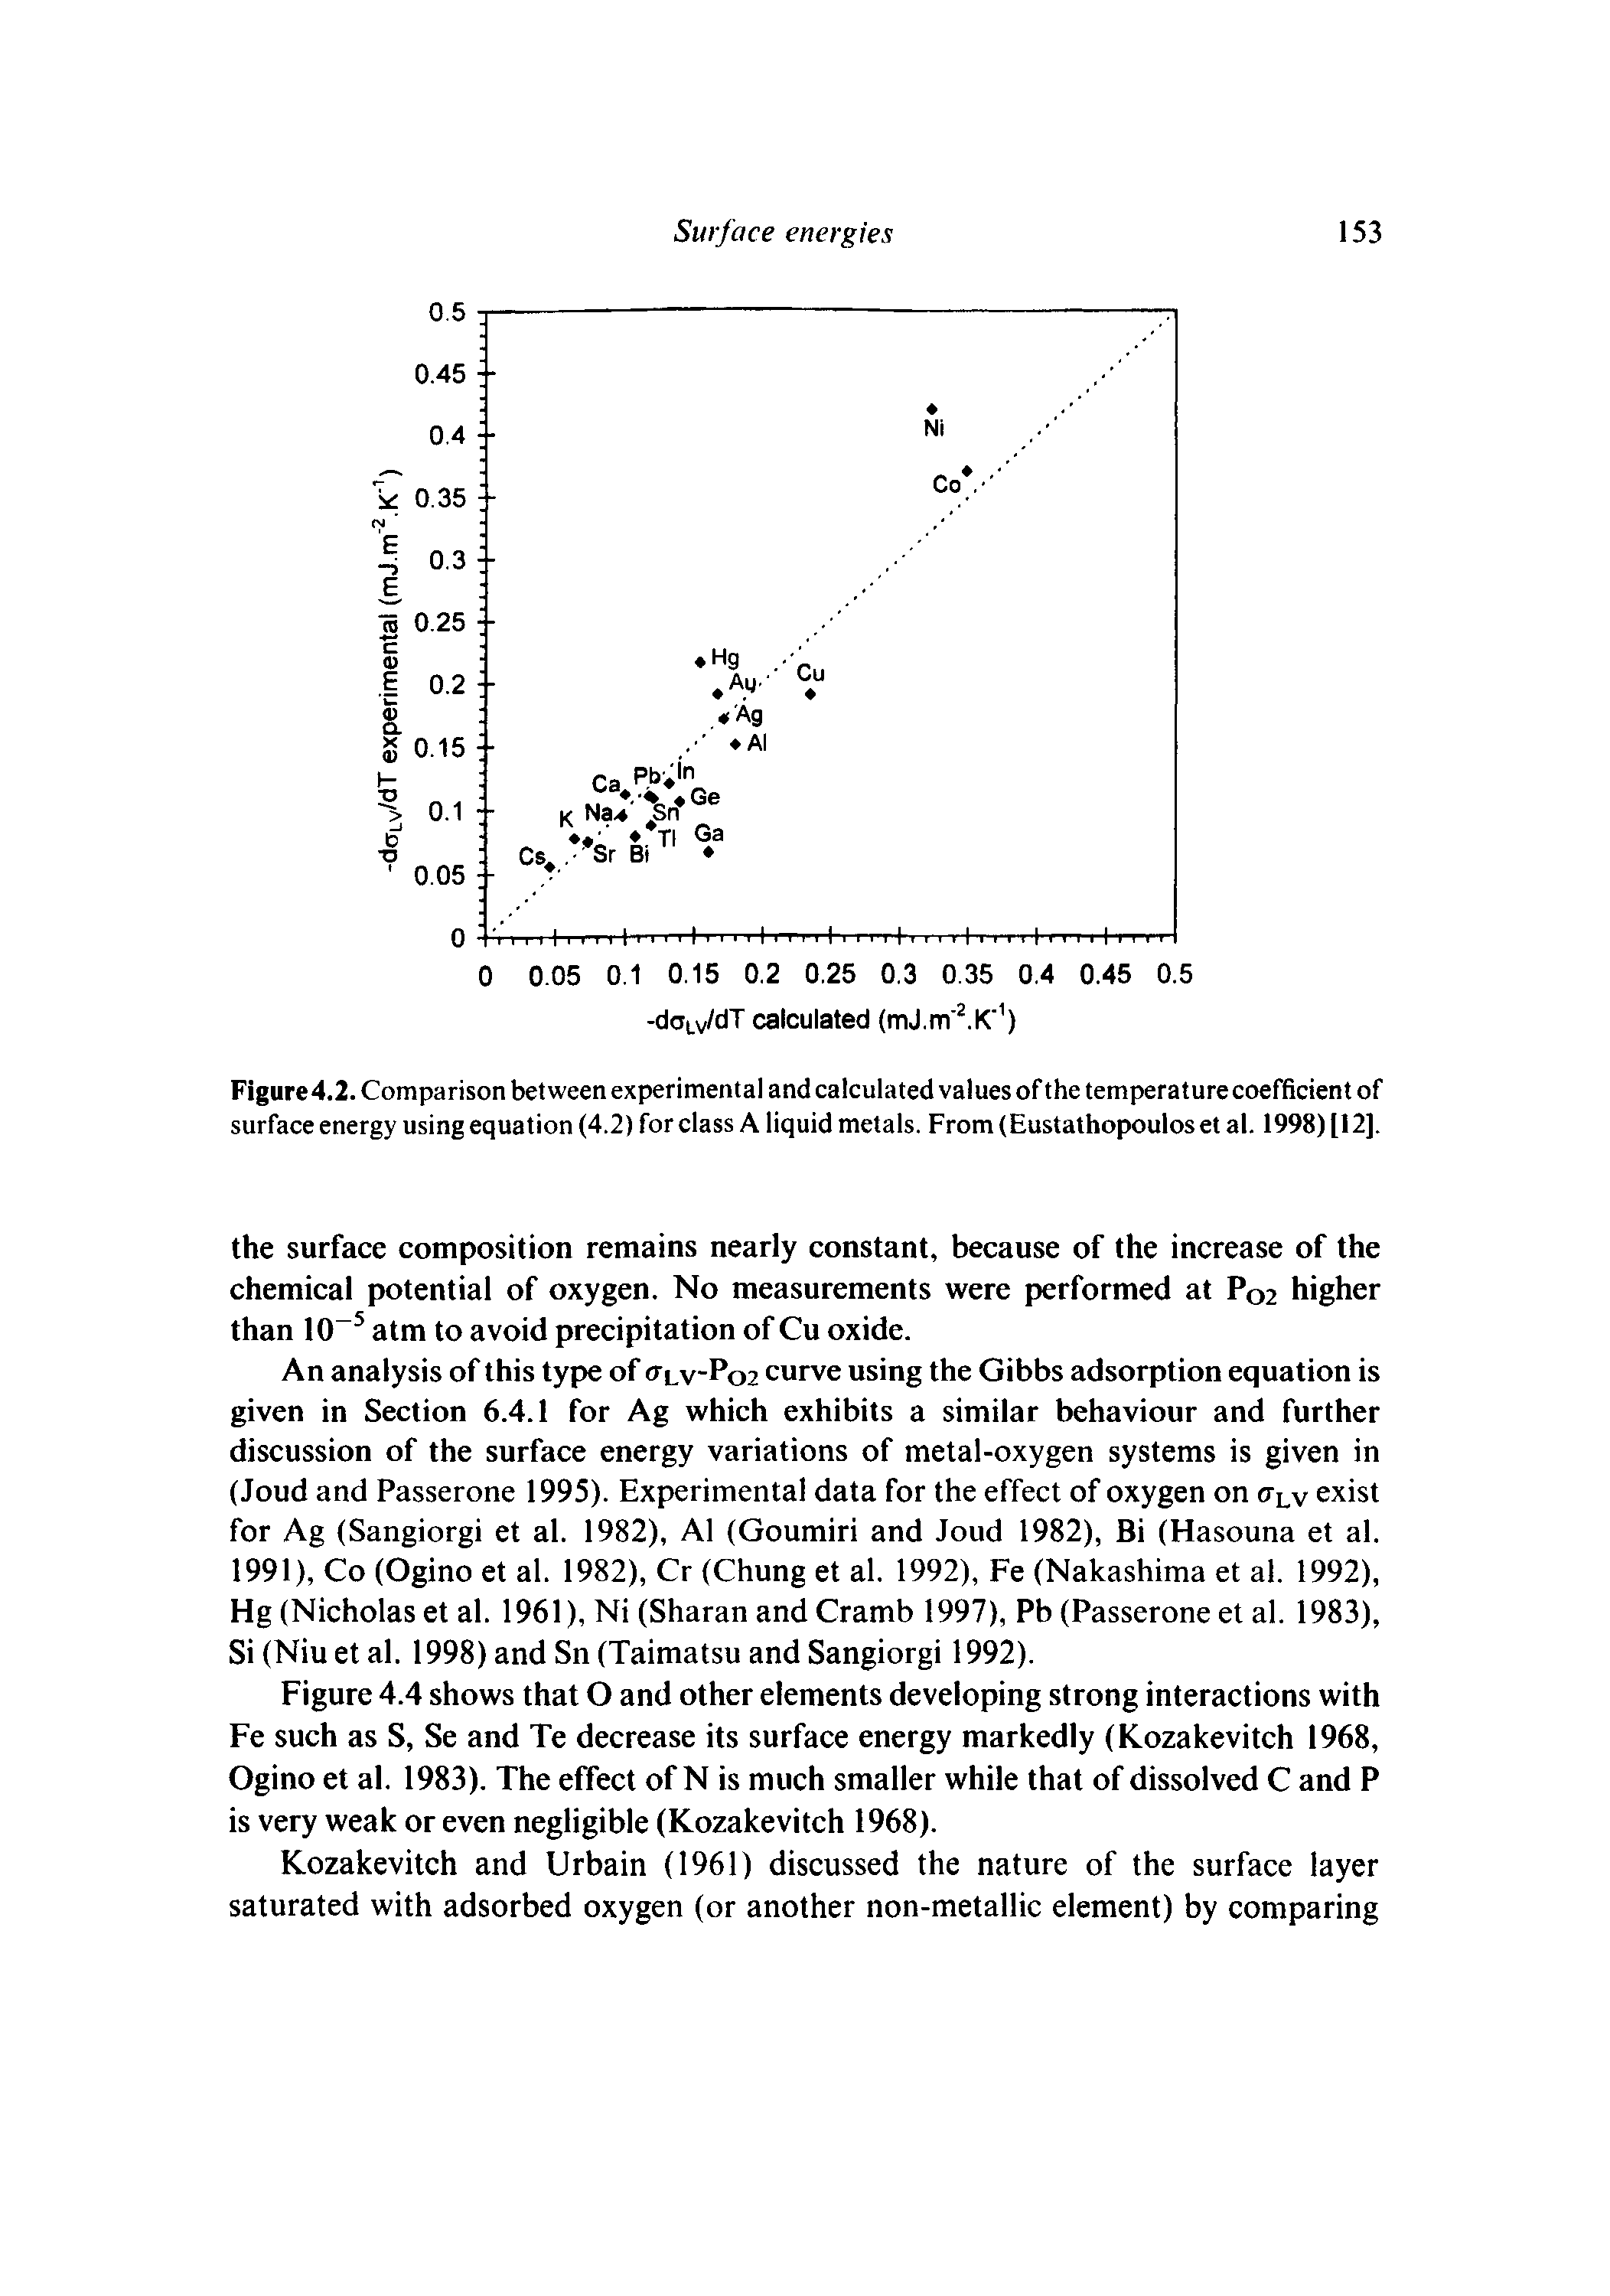 Figure4.2. Comparison between experimental and calculated values of the temperature coefficient of surface energy using equation (4.2) for class A liquid metals. From (Eustathopoulos et al. 1998) [12],...